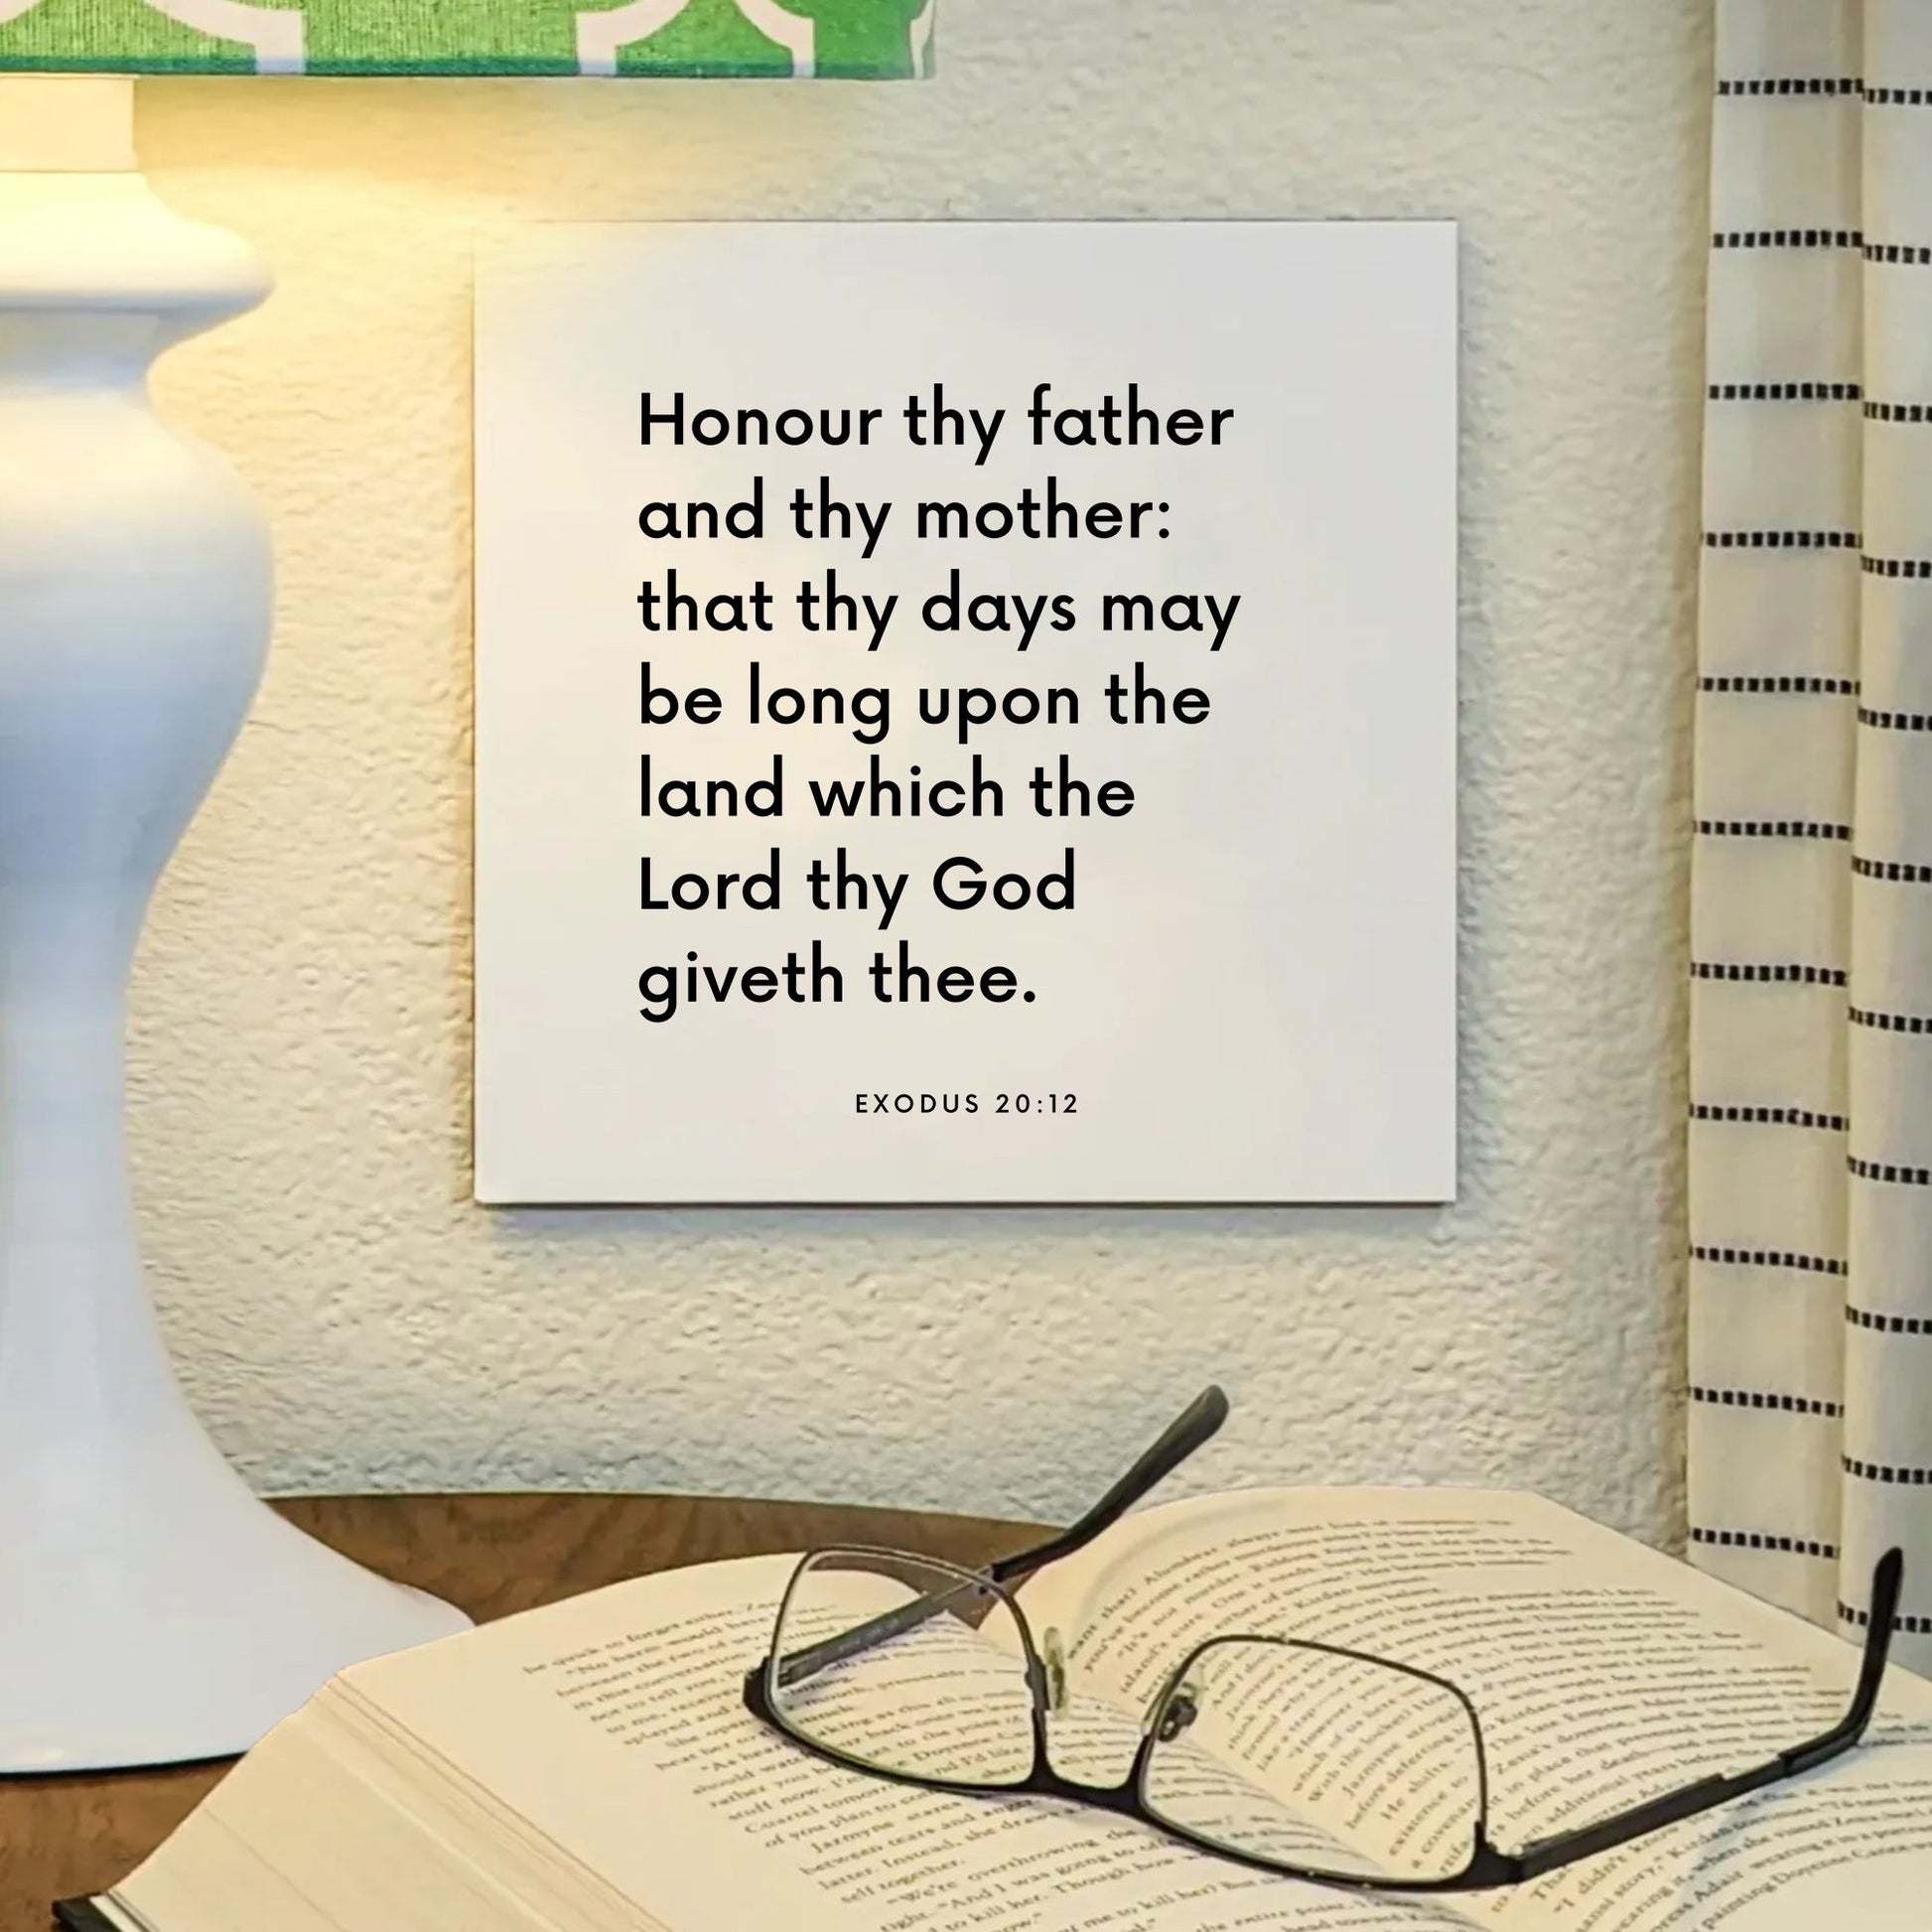 Lamp mouting of the scripture tile for Exodus 20:12 - "Honour thy father and thy mother"